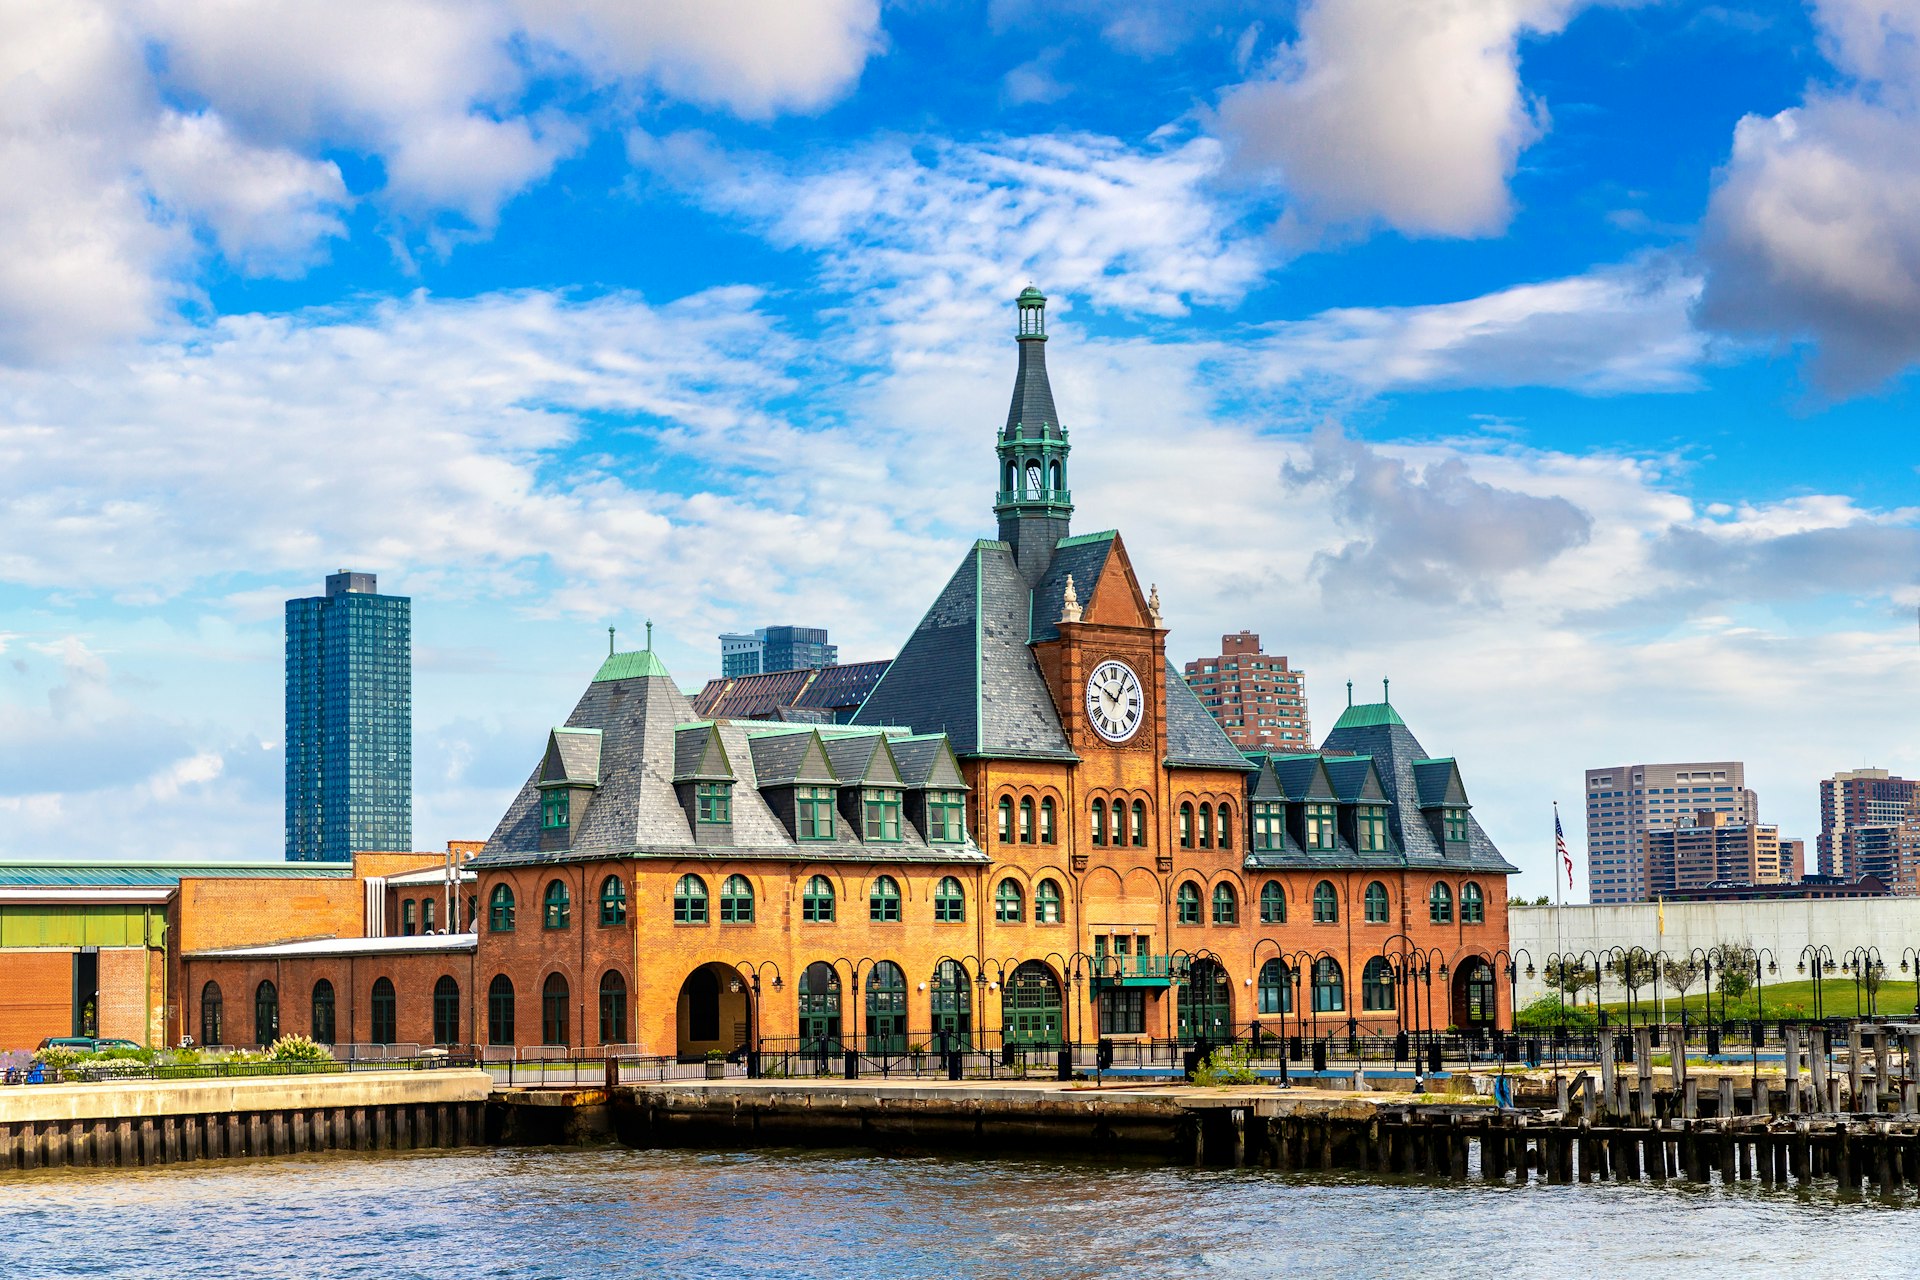 The picture-perfect Central Railroad of New Jersey Terminal in Liberty State Park, Jersey City